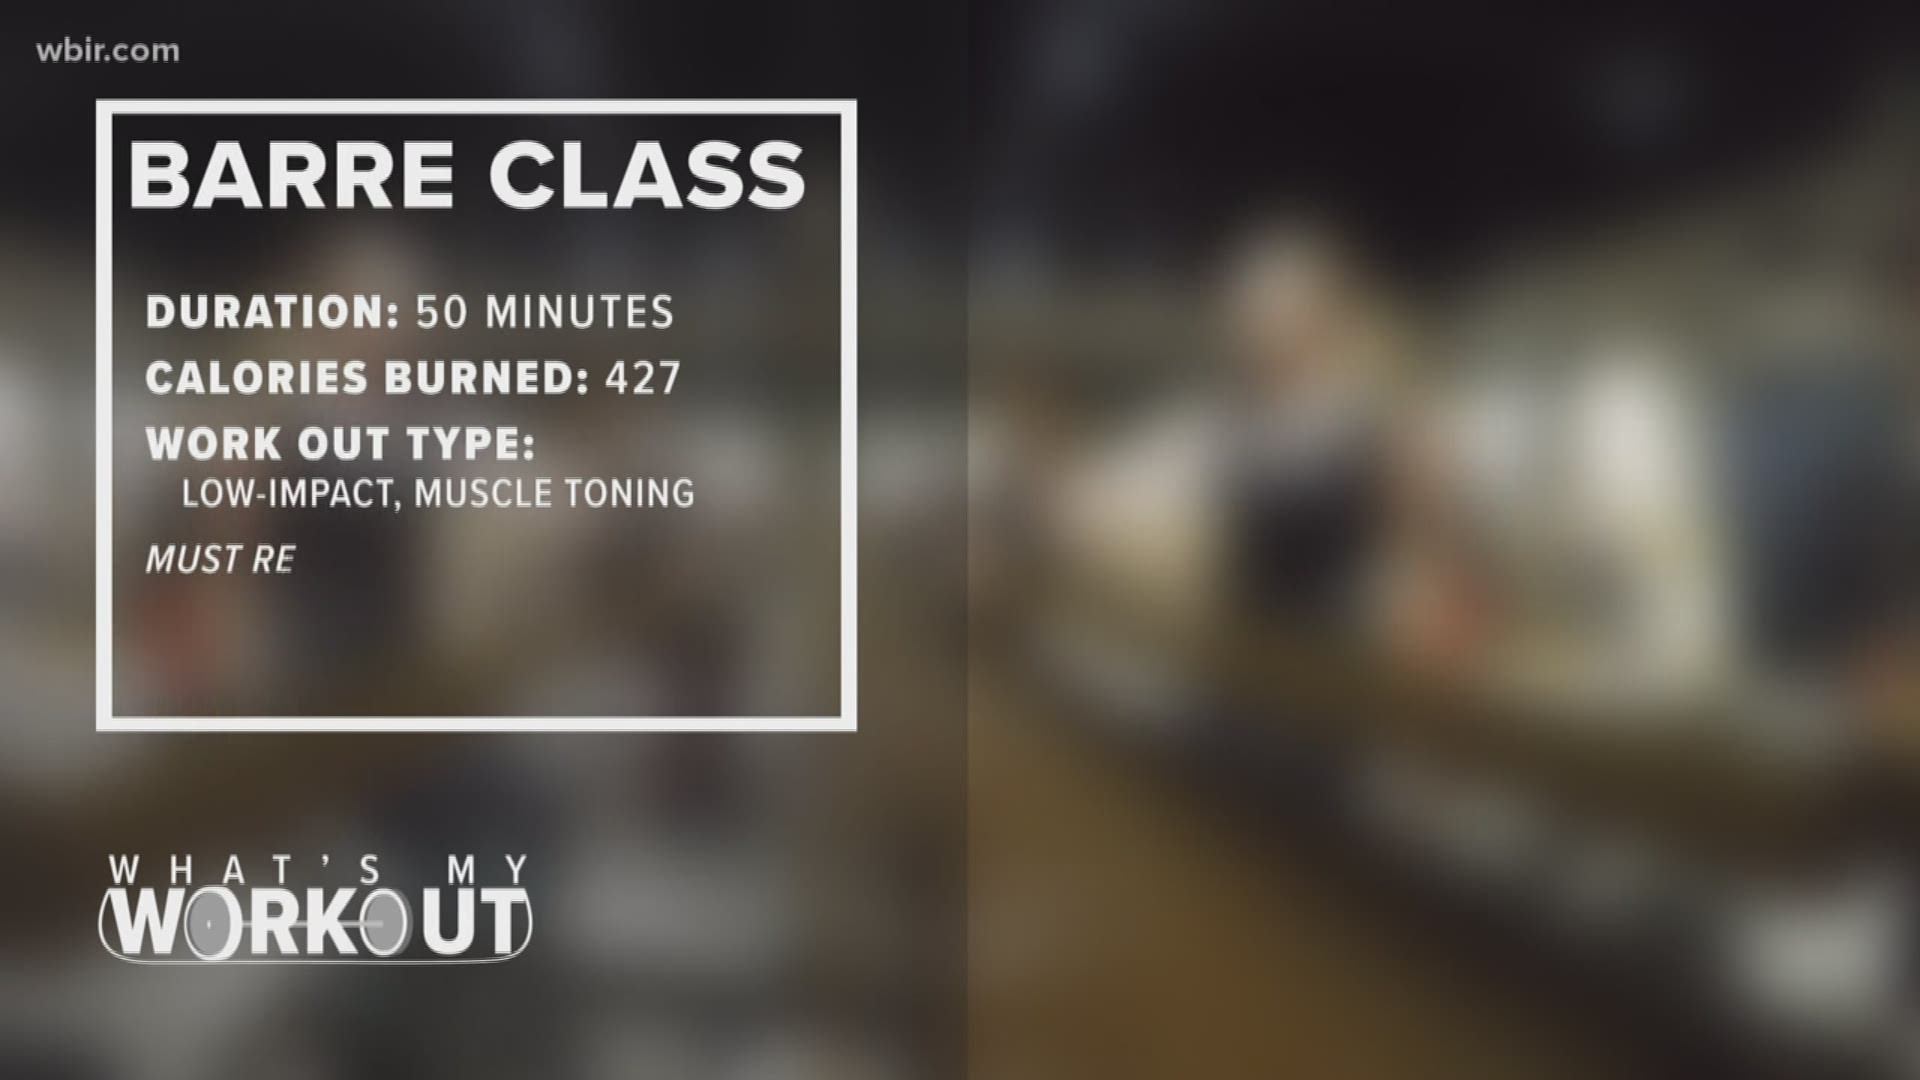 Chierstin Susel gives us a look into a barre class.